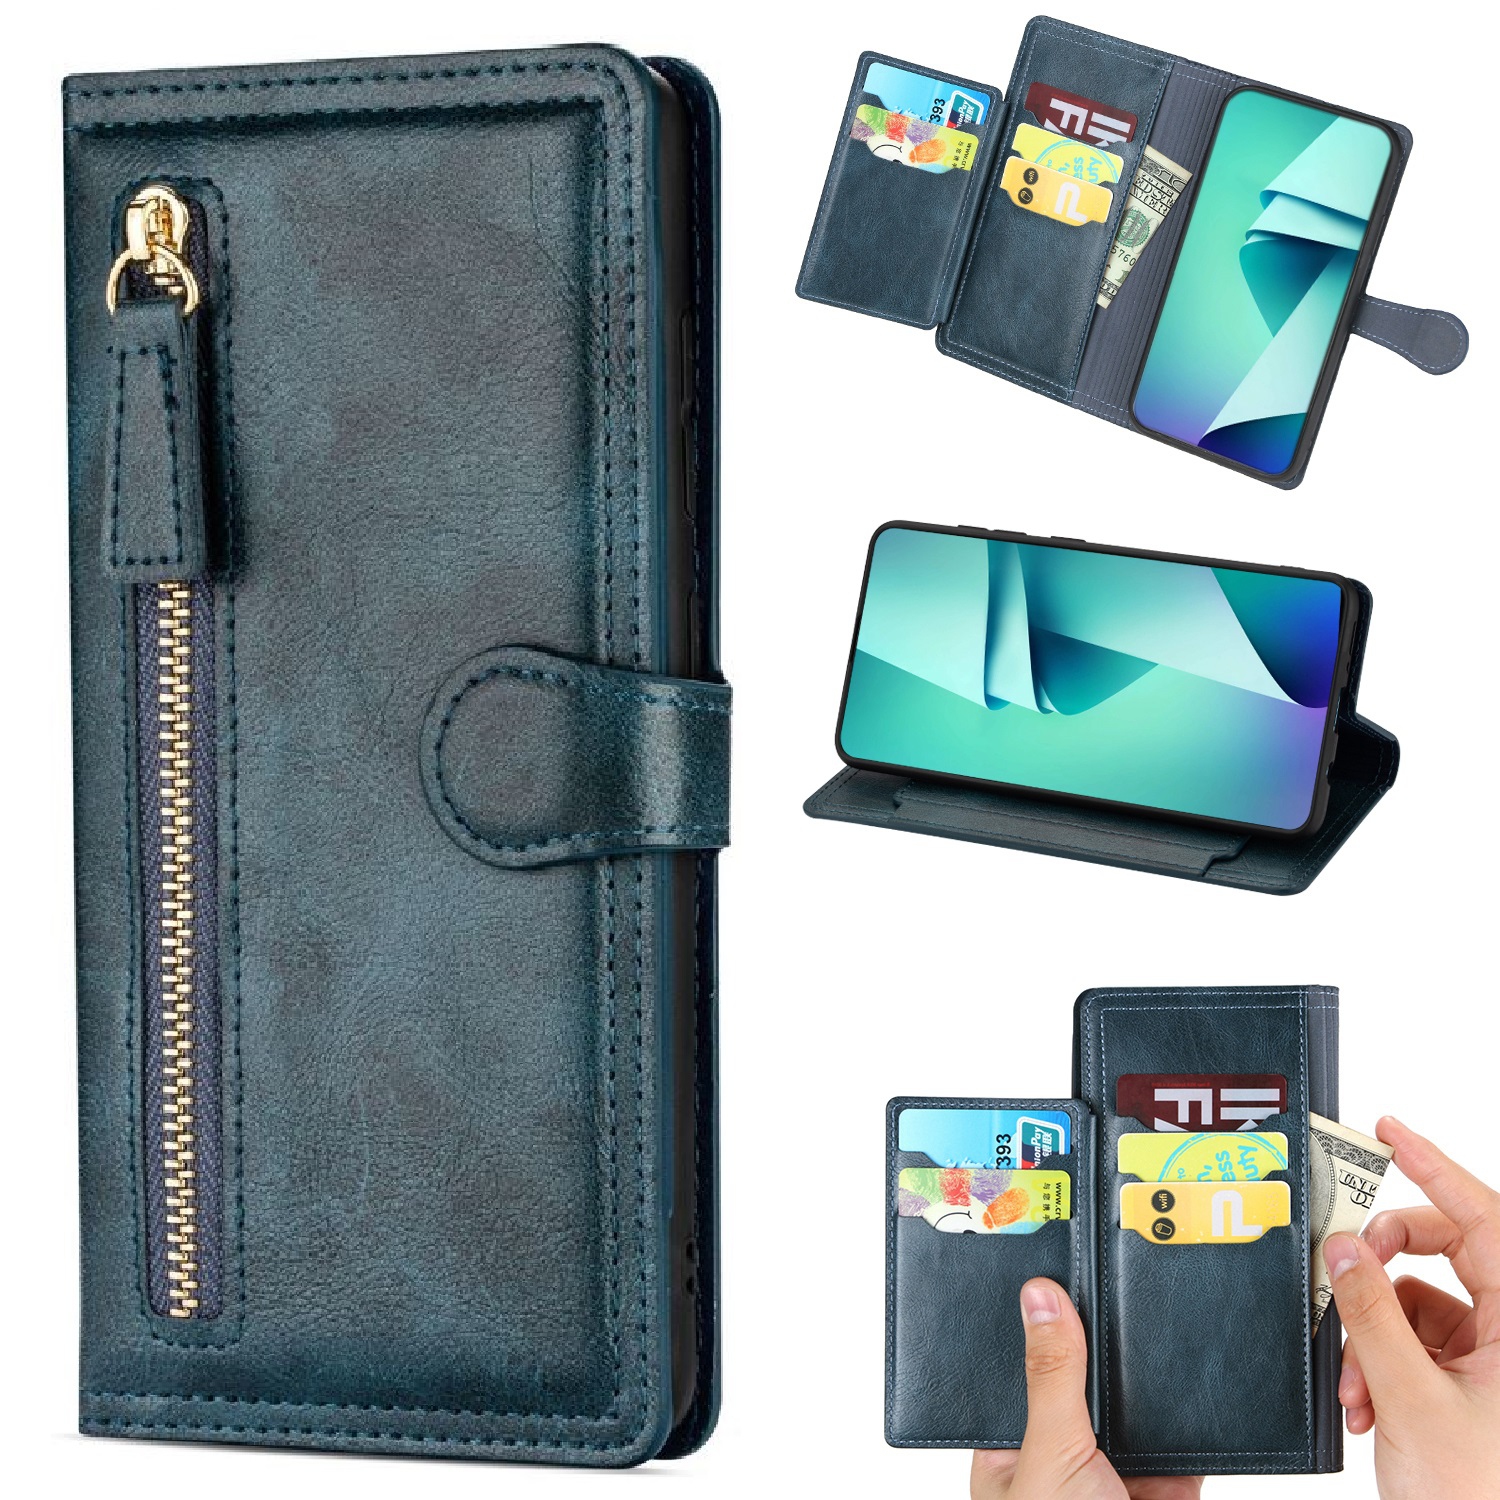 PIERO Leather Zipper Wallet Case Flip Card Holder Stand Phone Cover Premium Leather Flip Cover for Samsung Galaxy S22 ULTRA -Cyan (FREE SHIPPING)